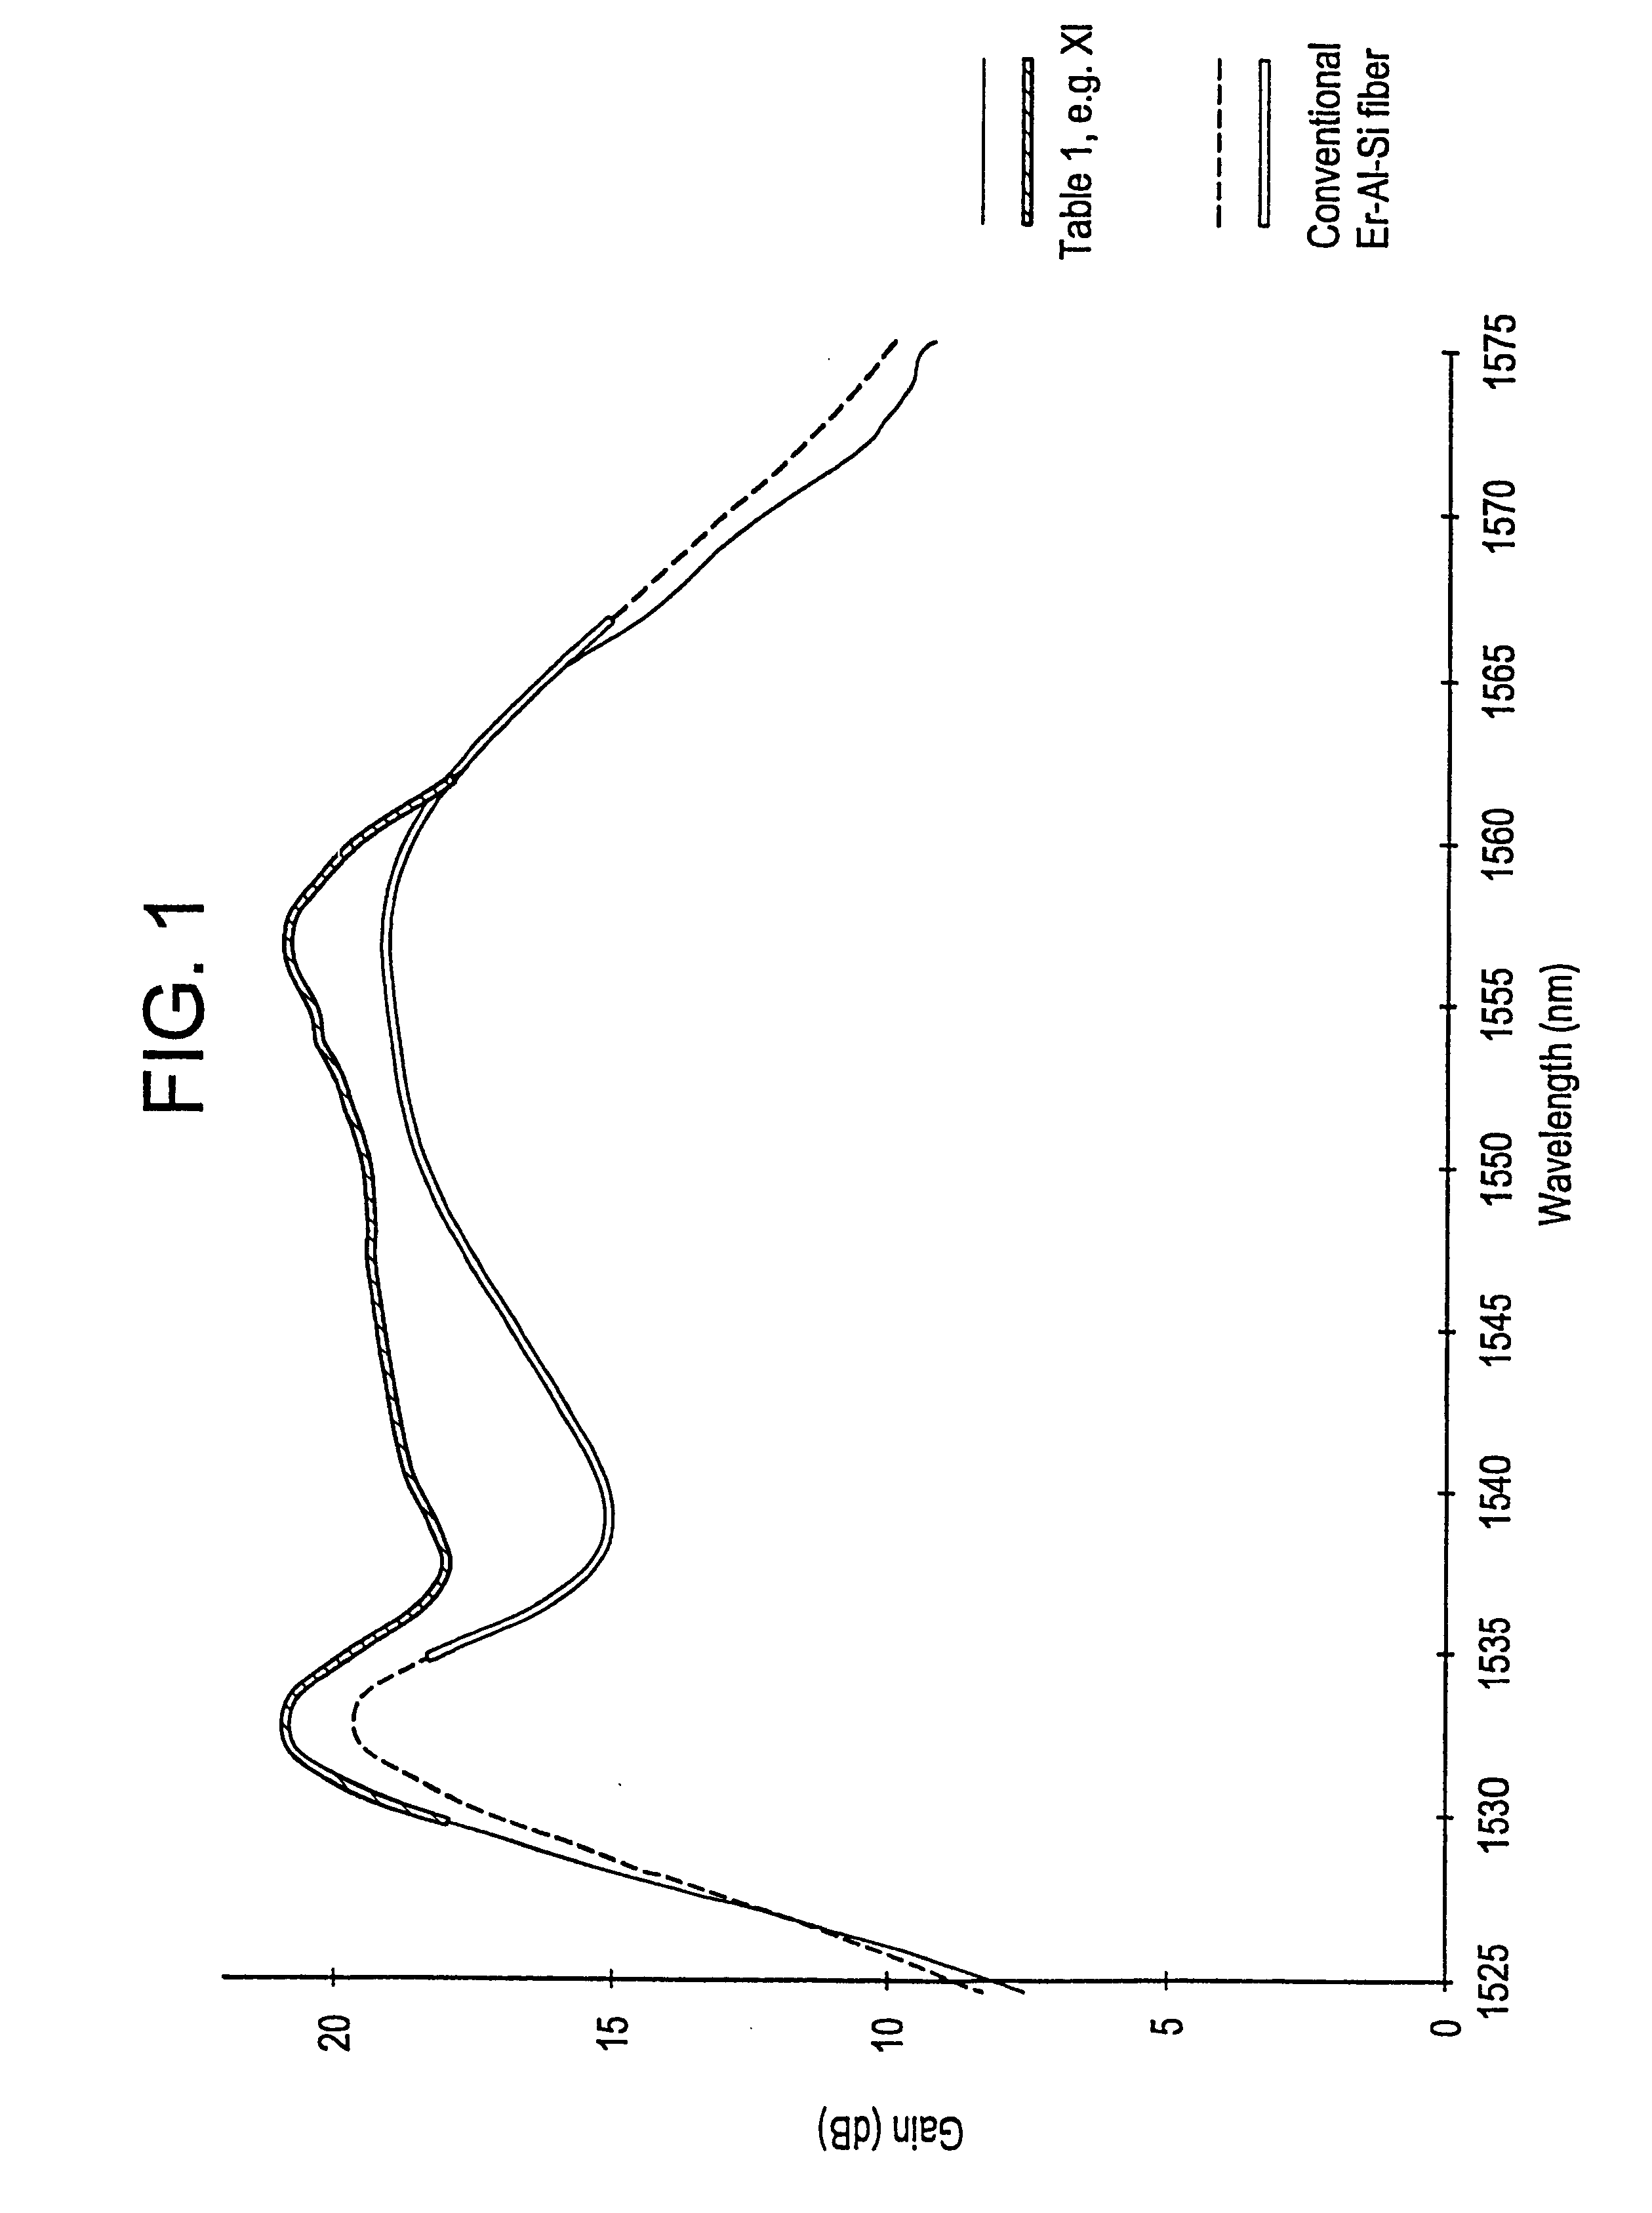 Method of making an optical fiber by melting particulate glass in a glass cladding tube